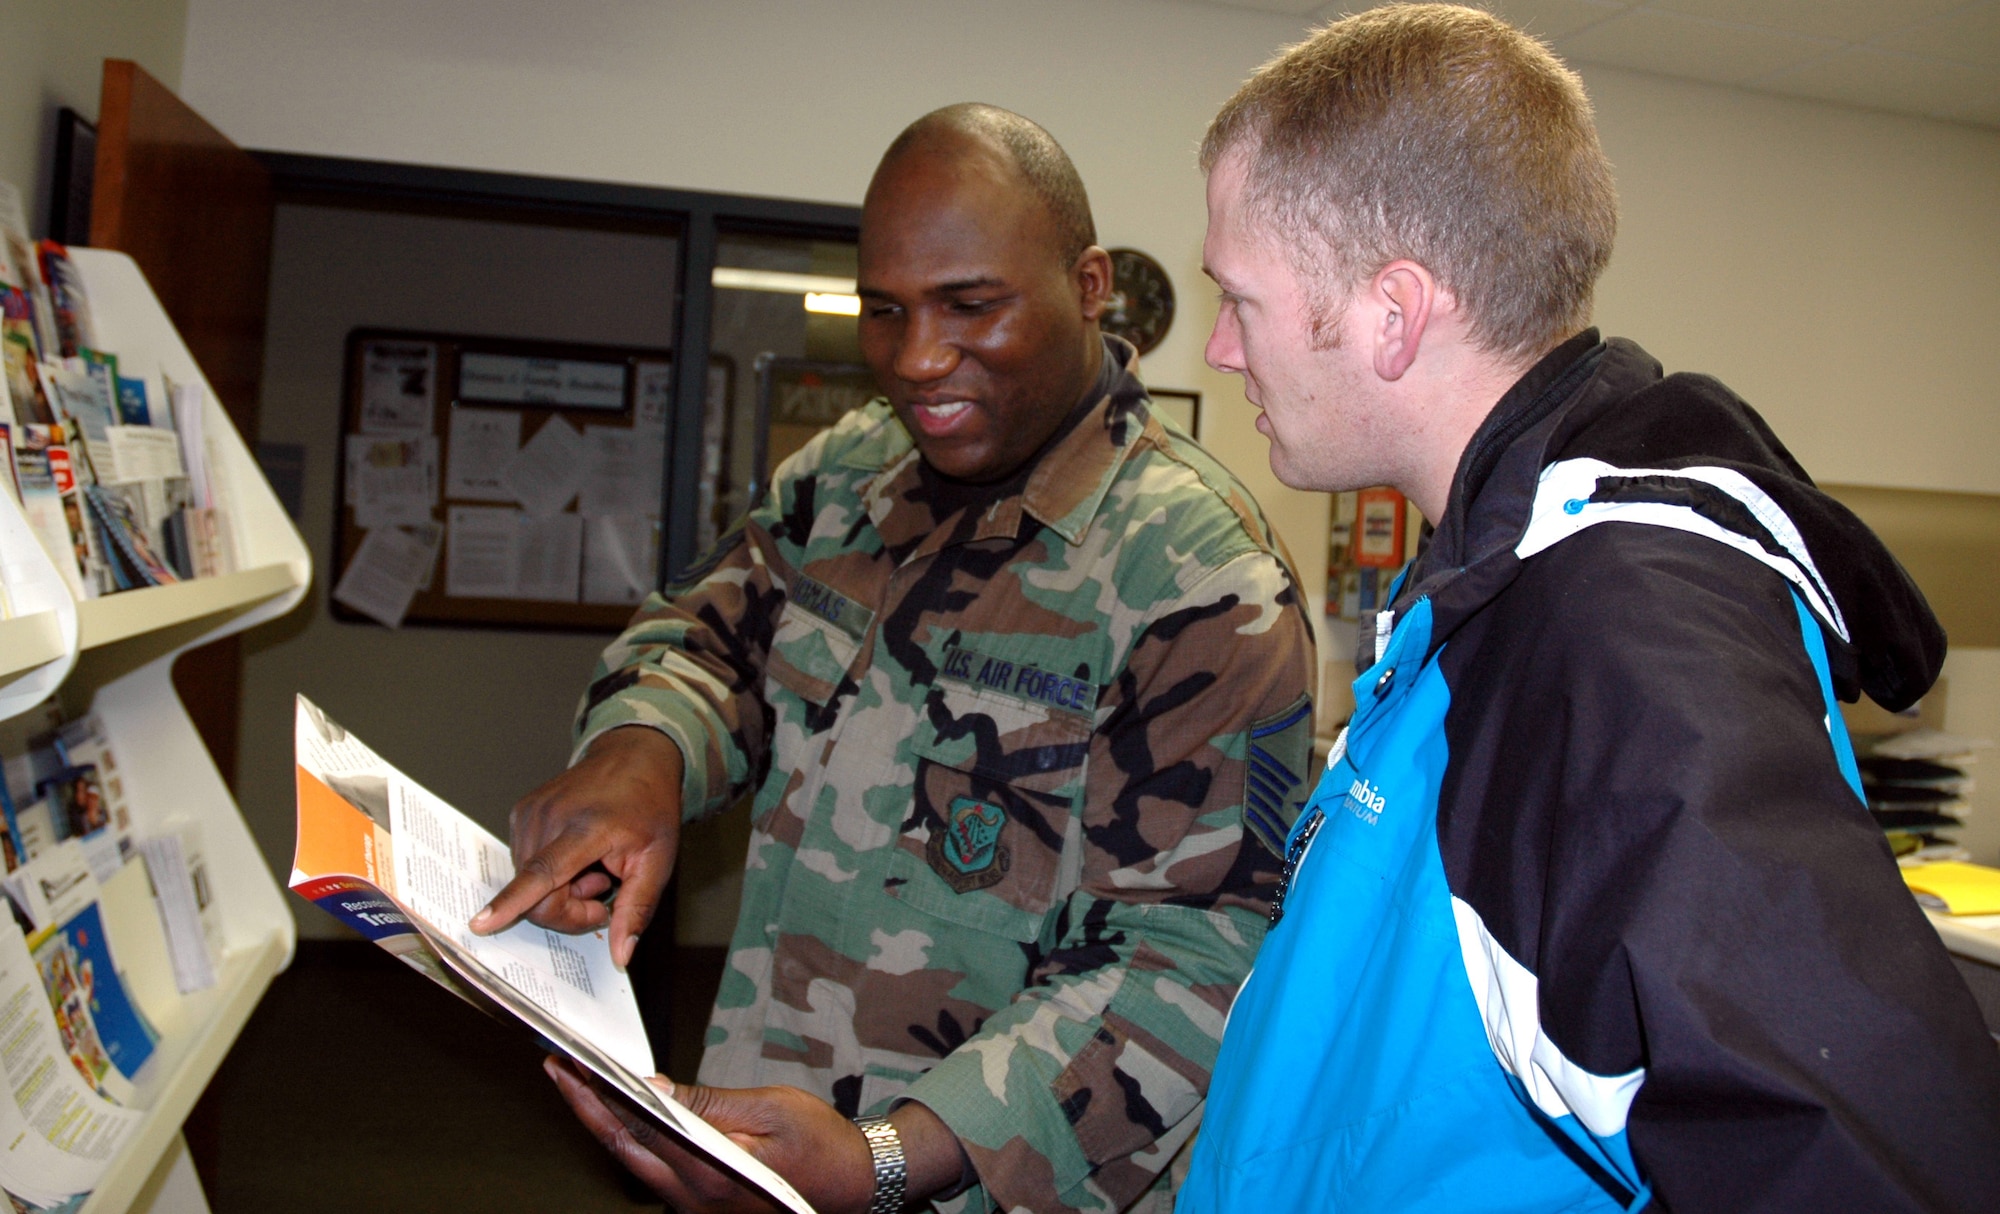 JOINT BASE LEWIS-MCCHORD, Wash. - Master Sgt. Steven Thomas, NCO in charge of the 446th Mission Support Squadron Airman & Family Readiness Center here (left), helps Tech. Sgt. Ian Ramos, 446th Logistics Readiness Flight, find information on budgeting and financial management, March 5. The center provides long-term, substantive programs to positively affect those areas of family life that directly impact the Air Force mission. The A&FRC provides programs, workshops and services to suit the needs of every Reservist, whether single, married, deployed, with kids or a civilan job. (U.S. Air Force photo/Staff Sgt. Nicole Celestine)